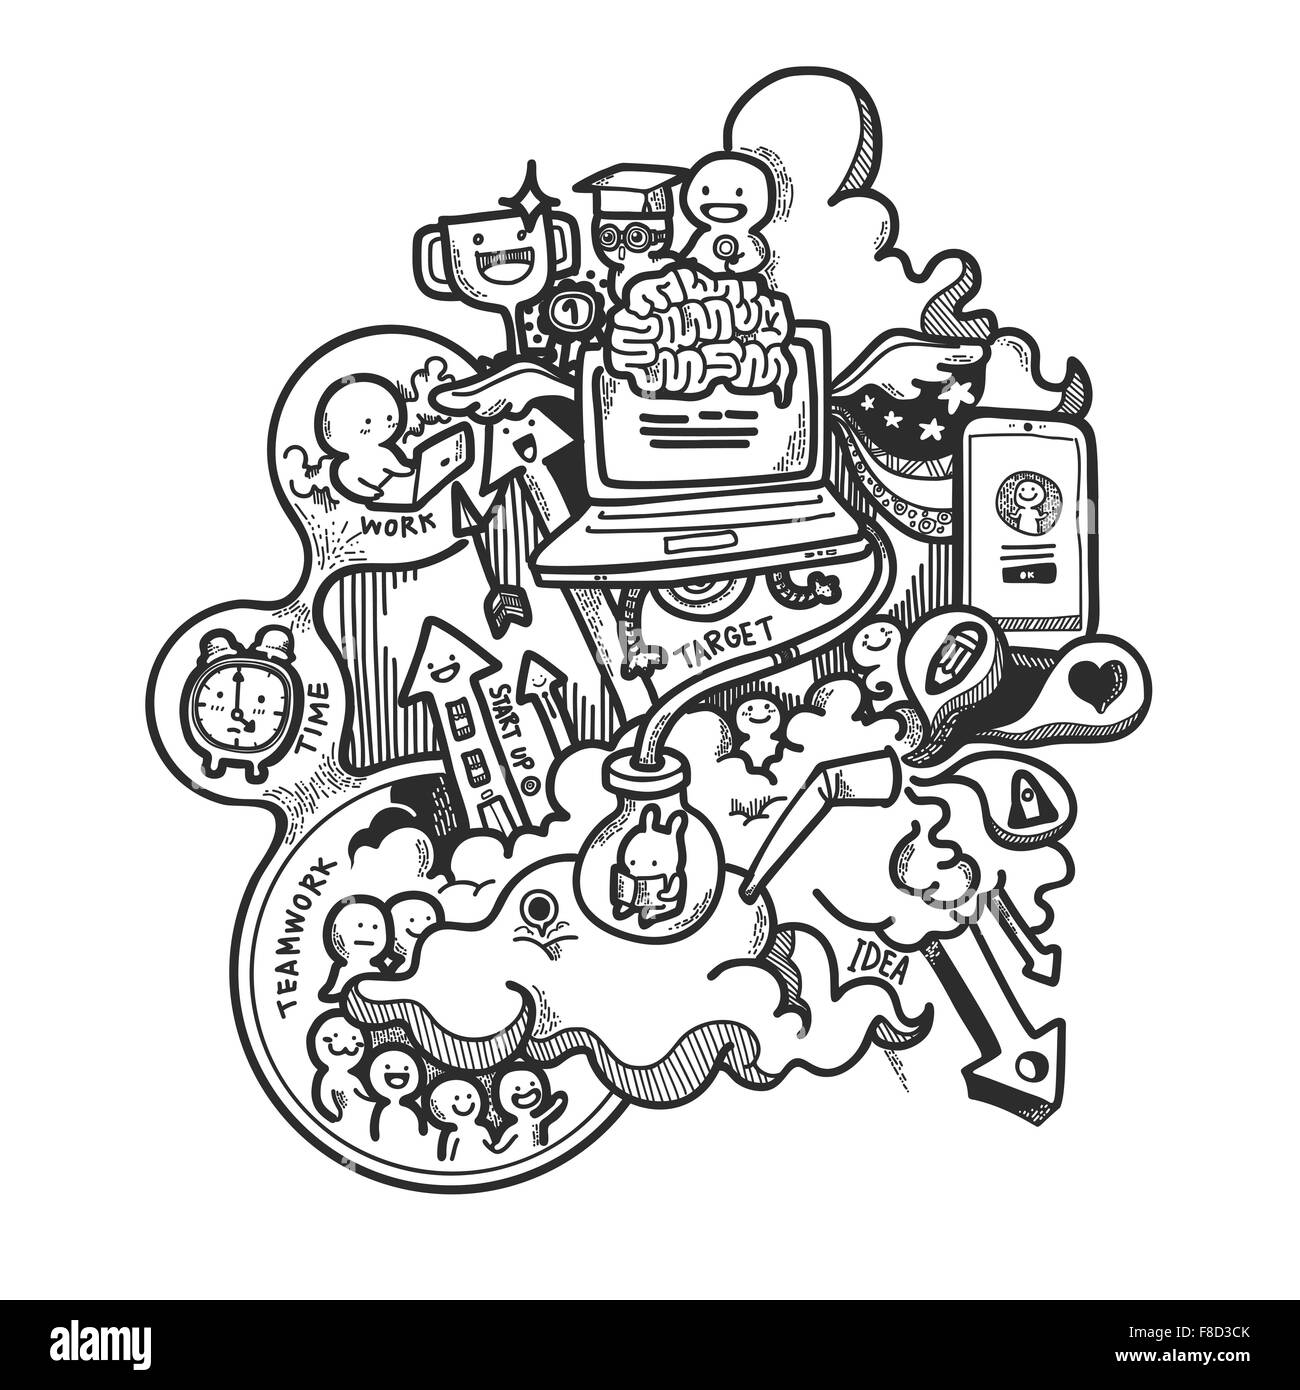 Vector Illustration of Start Up Doodle Hand Drawn Concepts Stock Vector